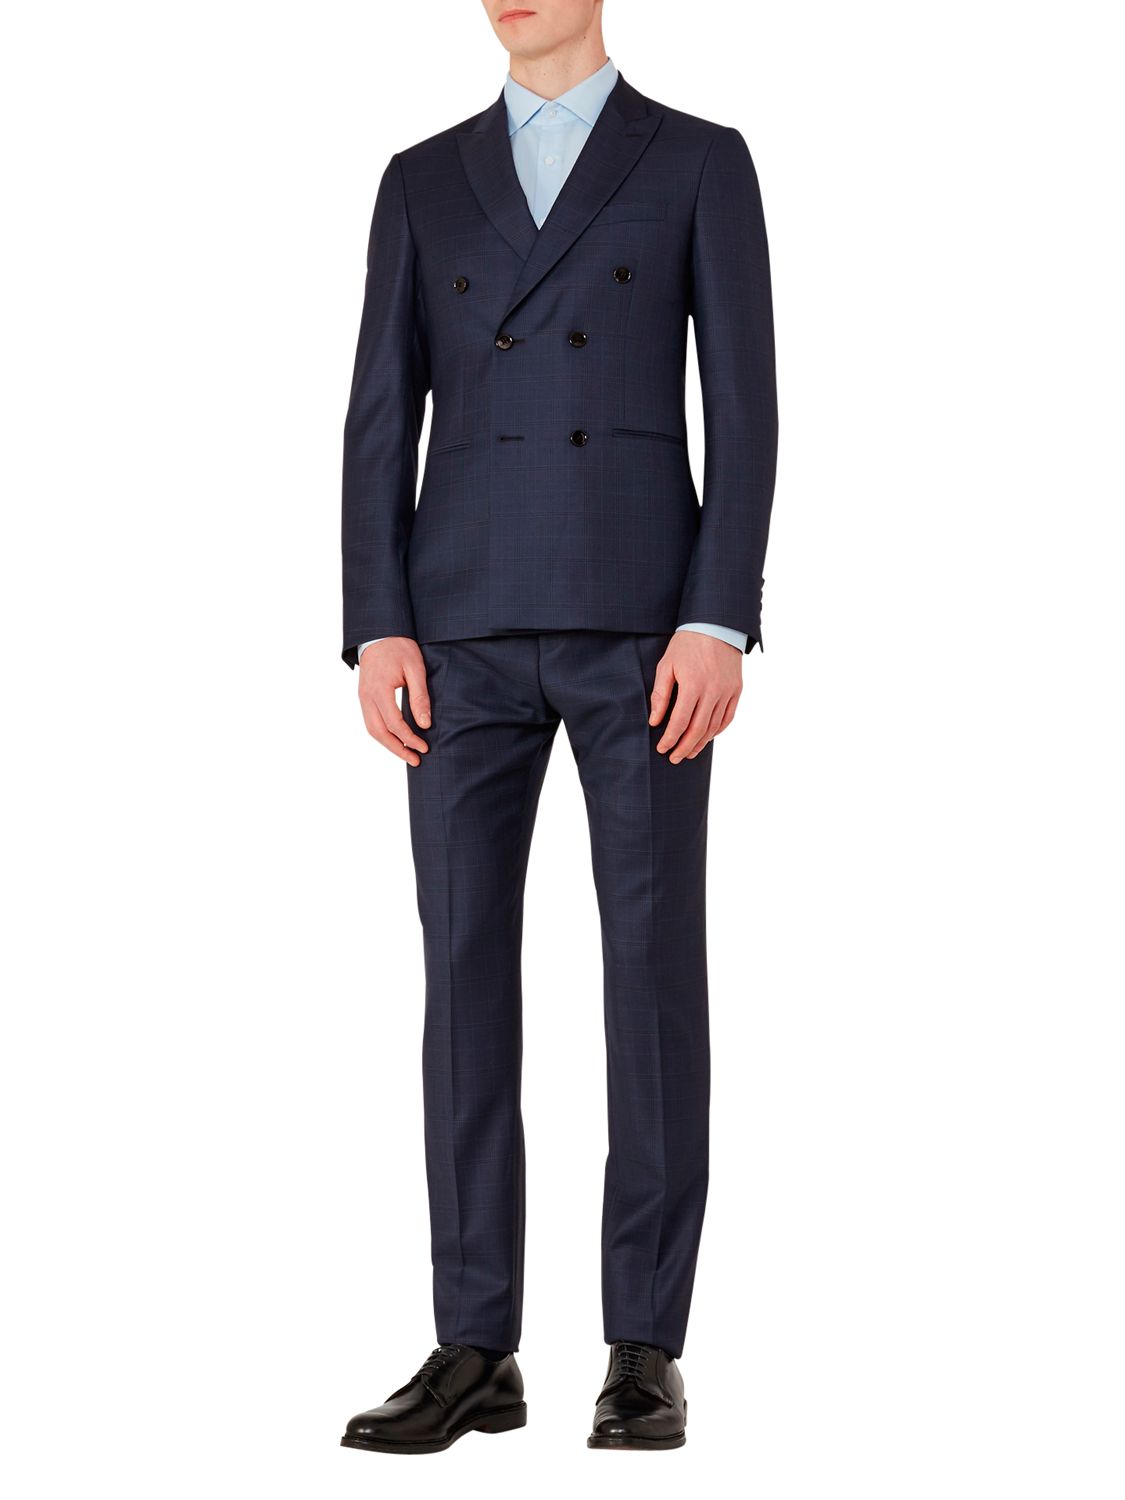 Reiss Arno Double-Breasted Check Modern Fit Suit, Navy